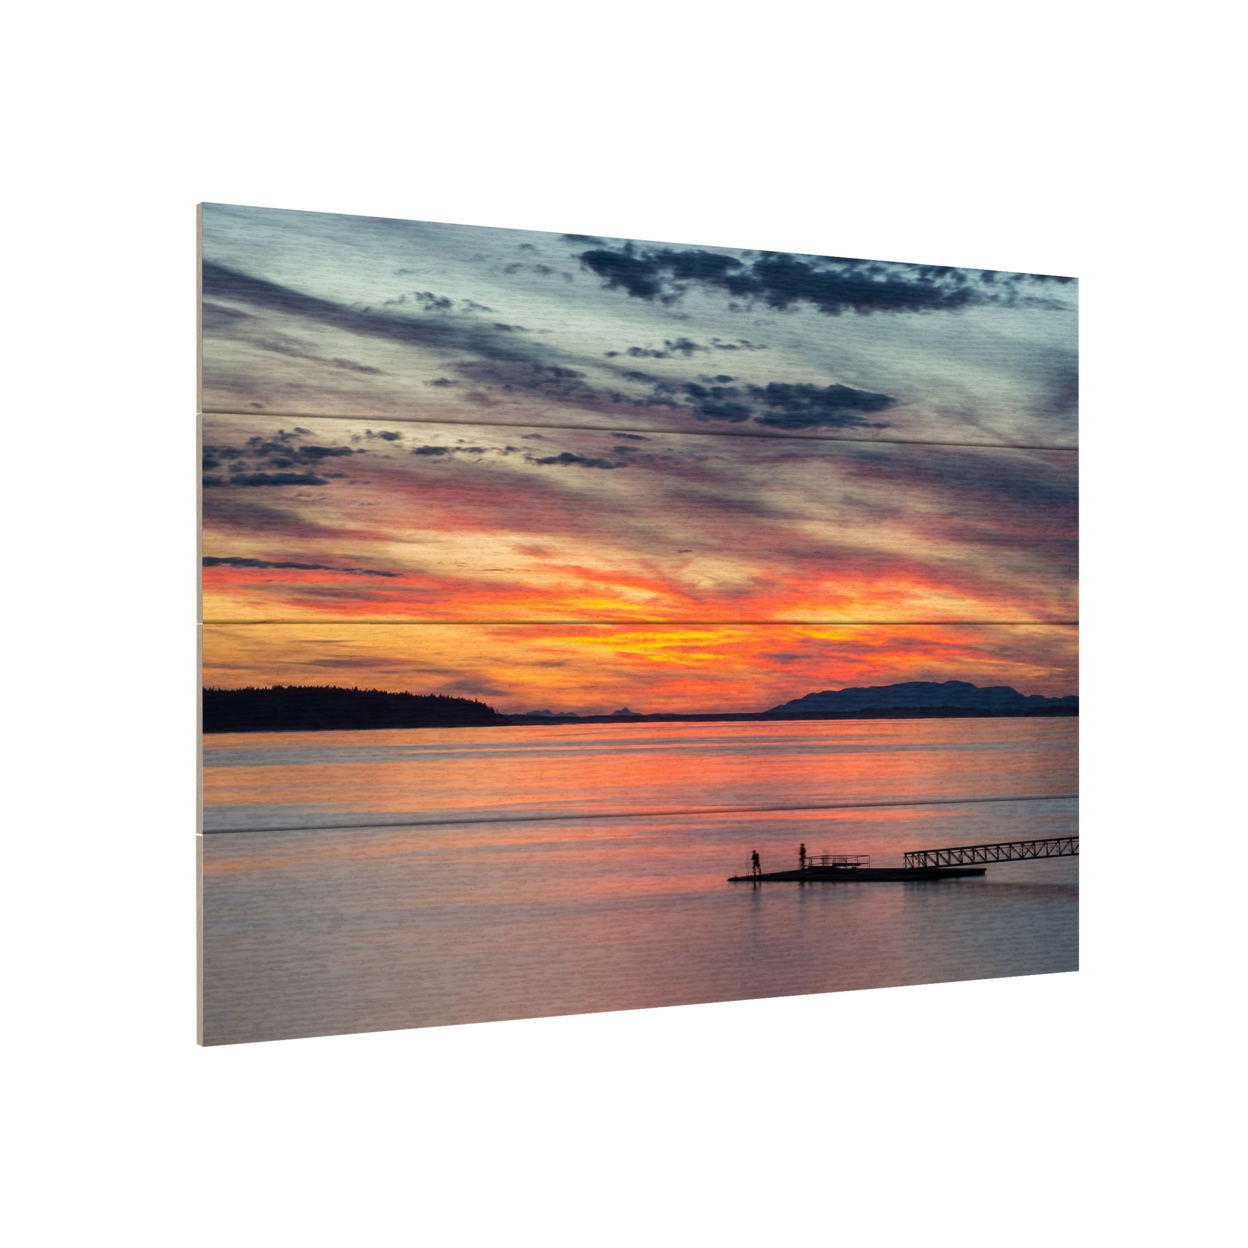 Wall Art 12 X 16 Inches Titled Sunset Pier Ready To Hang Printed On Wooden Planks